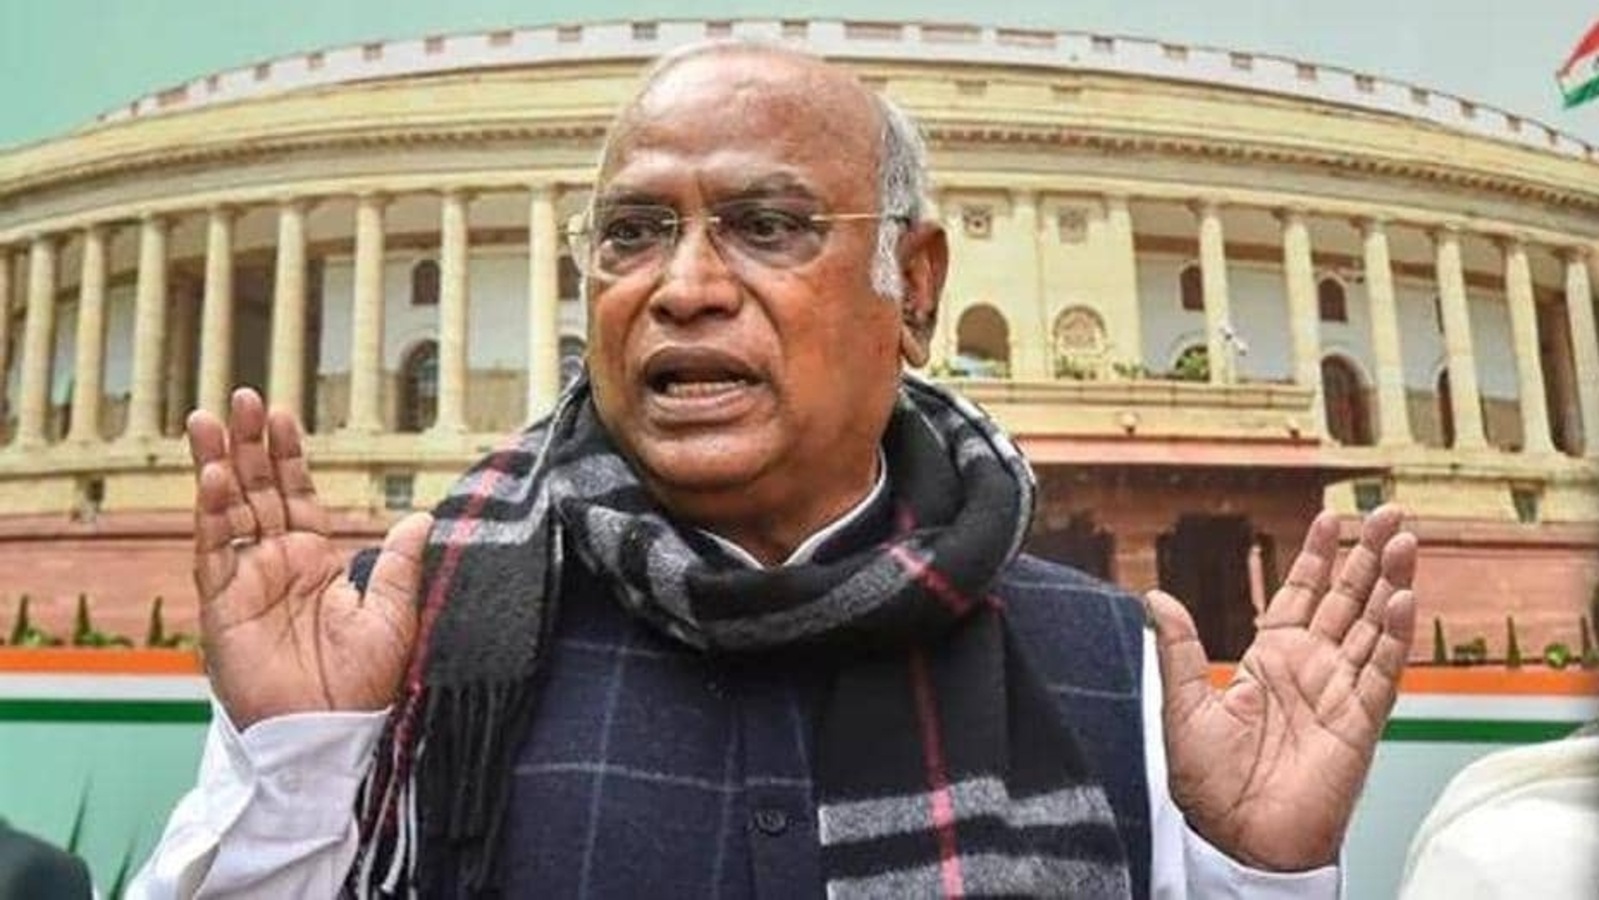 amid-growing-support-kharge-files-nomination-to-contest-congress-prez-polls